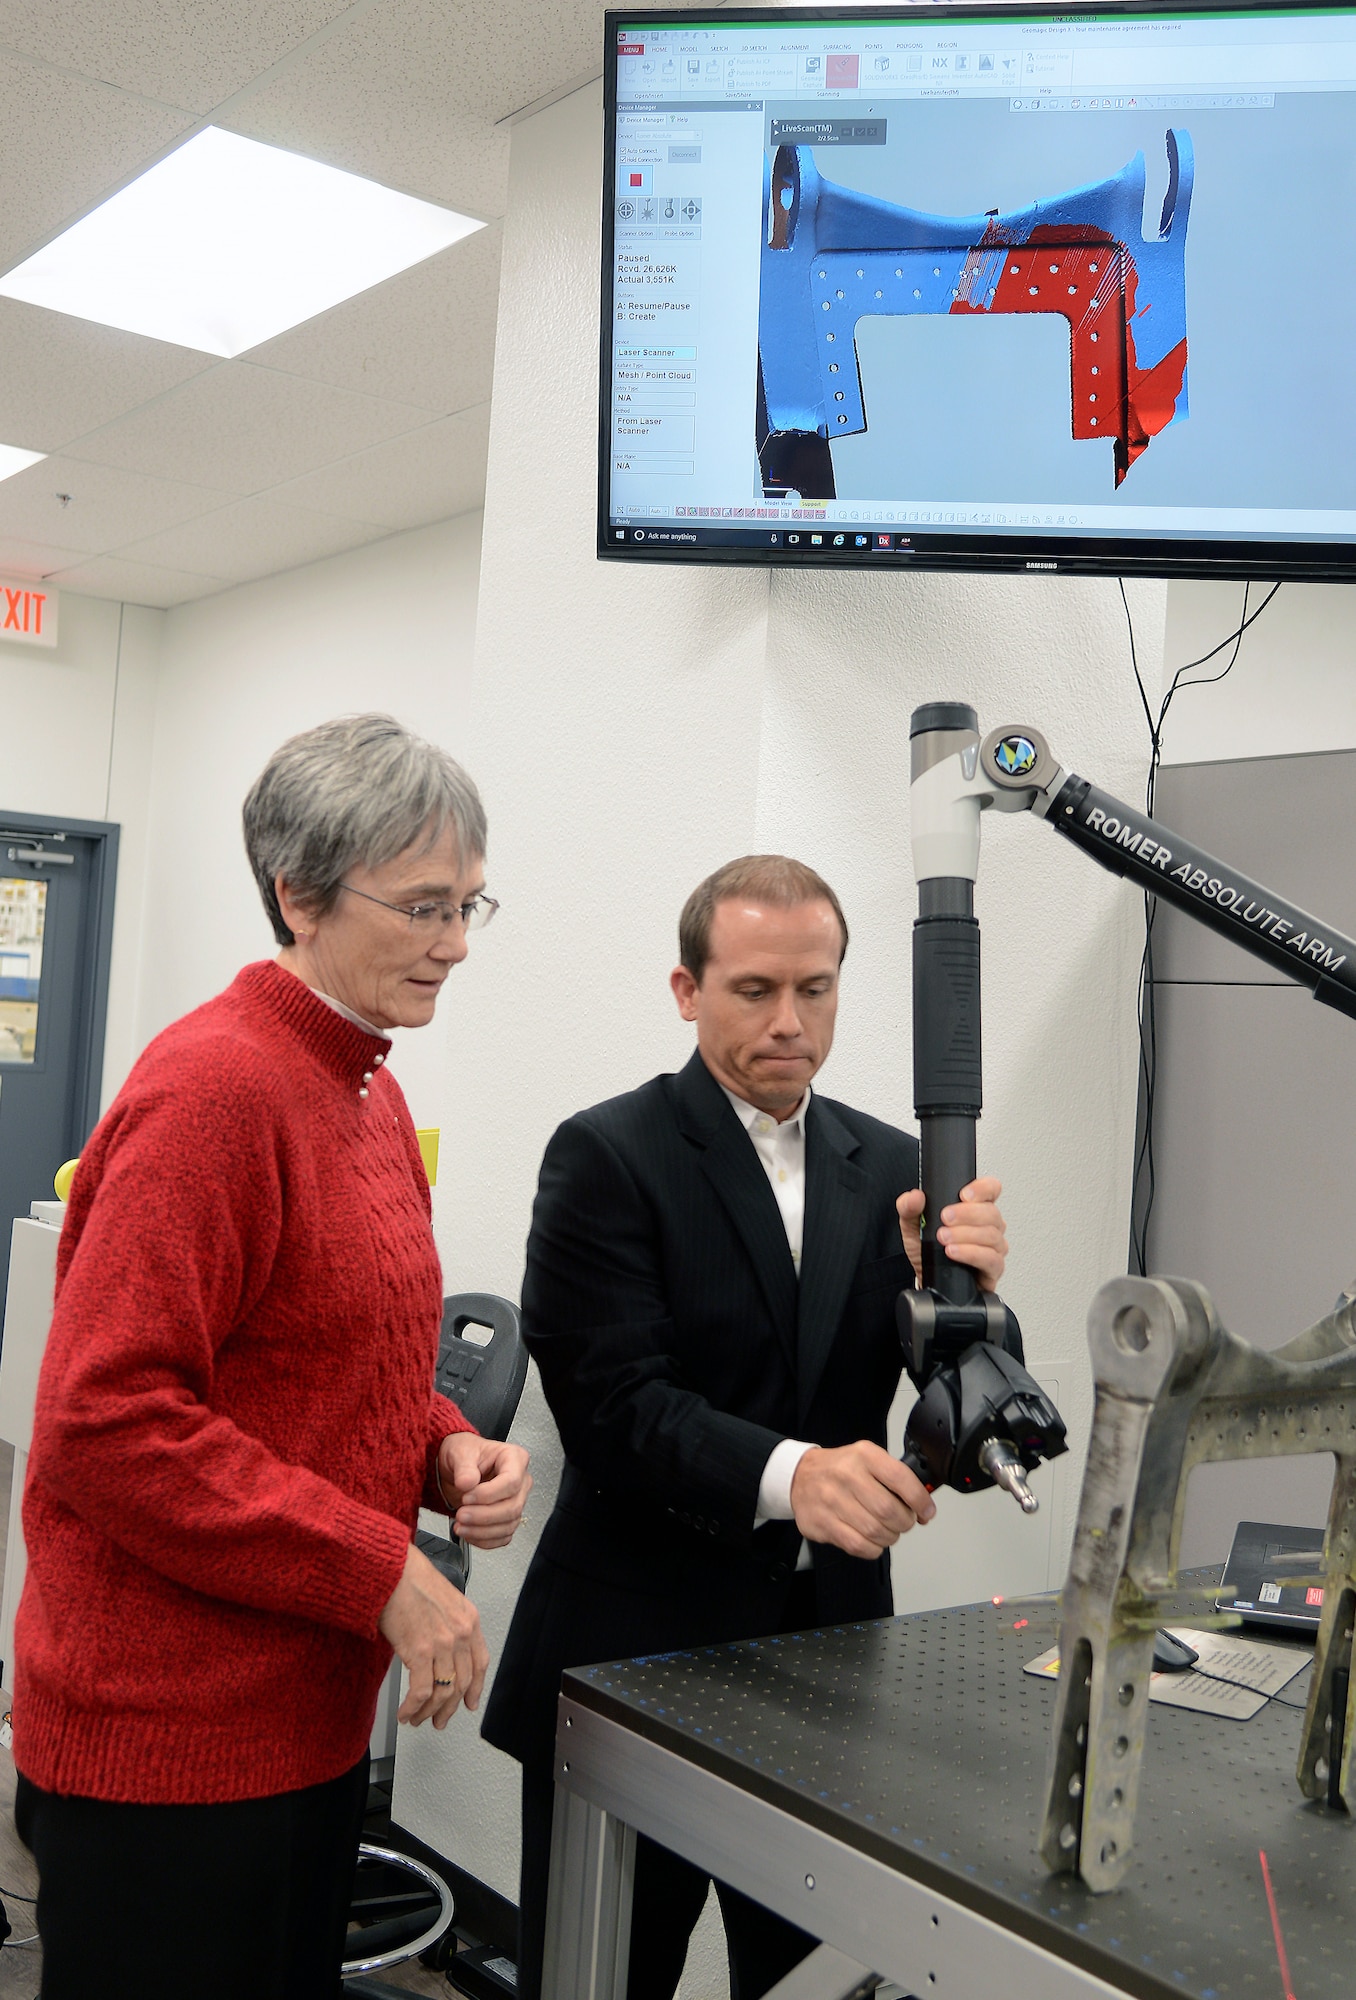 Nathan Pitcovich, Reverse Engineering and Critical Tooling Lab engineer, demonstrates a Romer Arm, which scans parts, to Secretary of the Air Force Heather Wilson, during her visit to Tinker Air Force Base Nov. 16. Wilson toured centers for innovation like the REACT lab and met with personnel responsible for sustaining the Air Force’s fleet of tanker, bomber and transport aircraft.